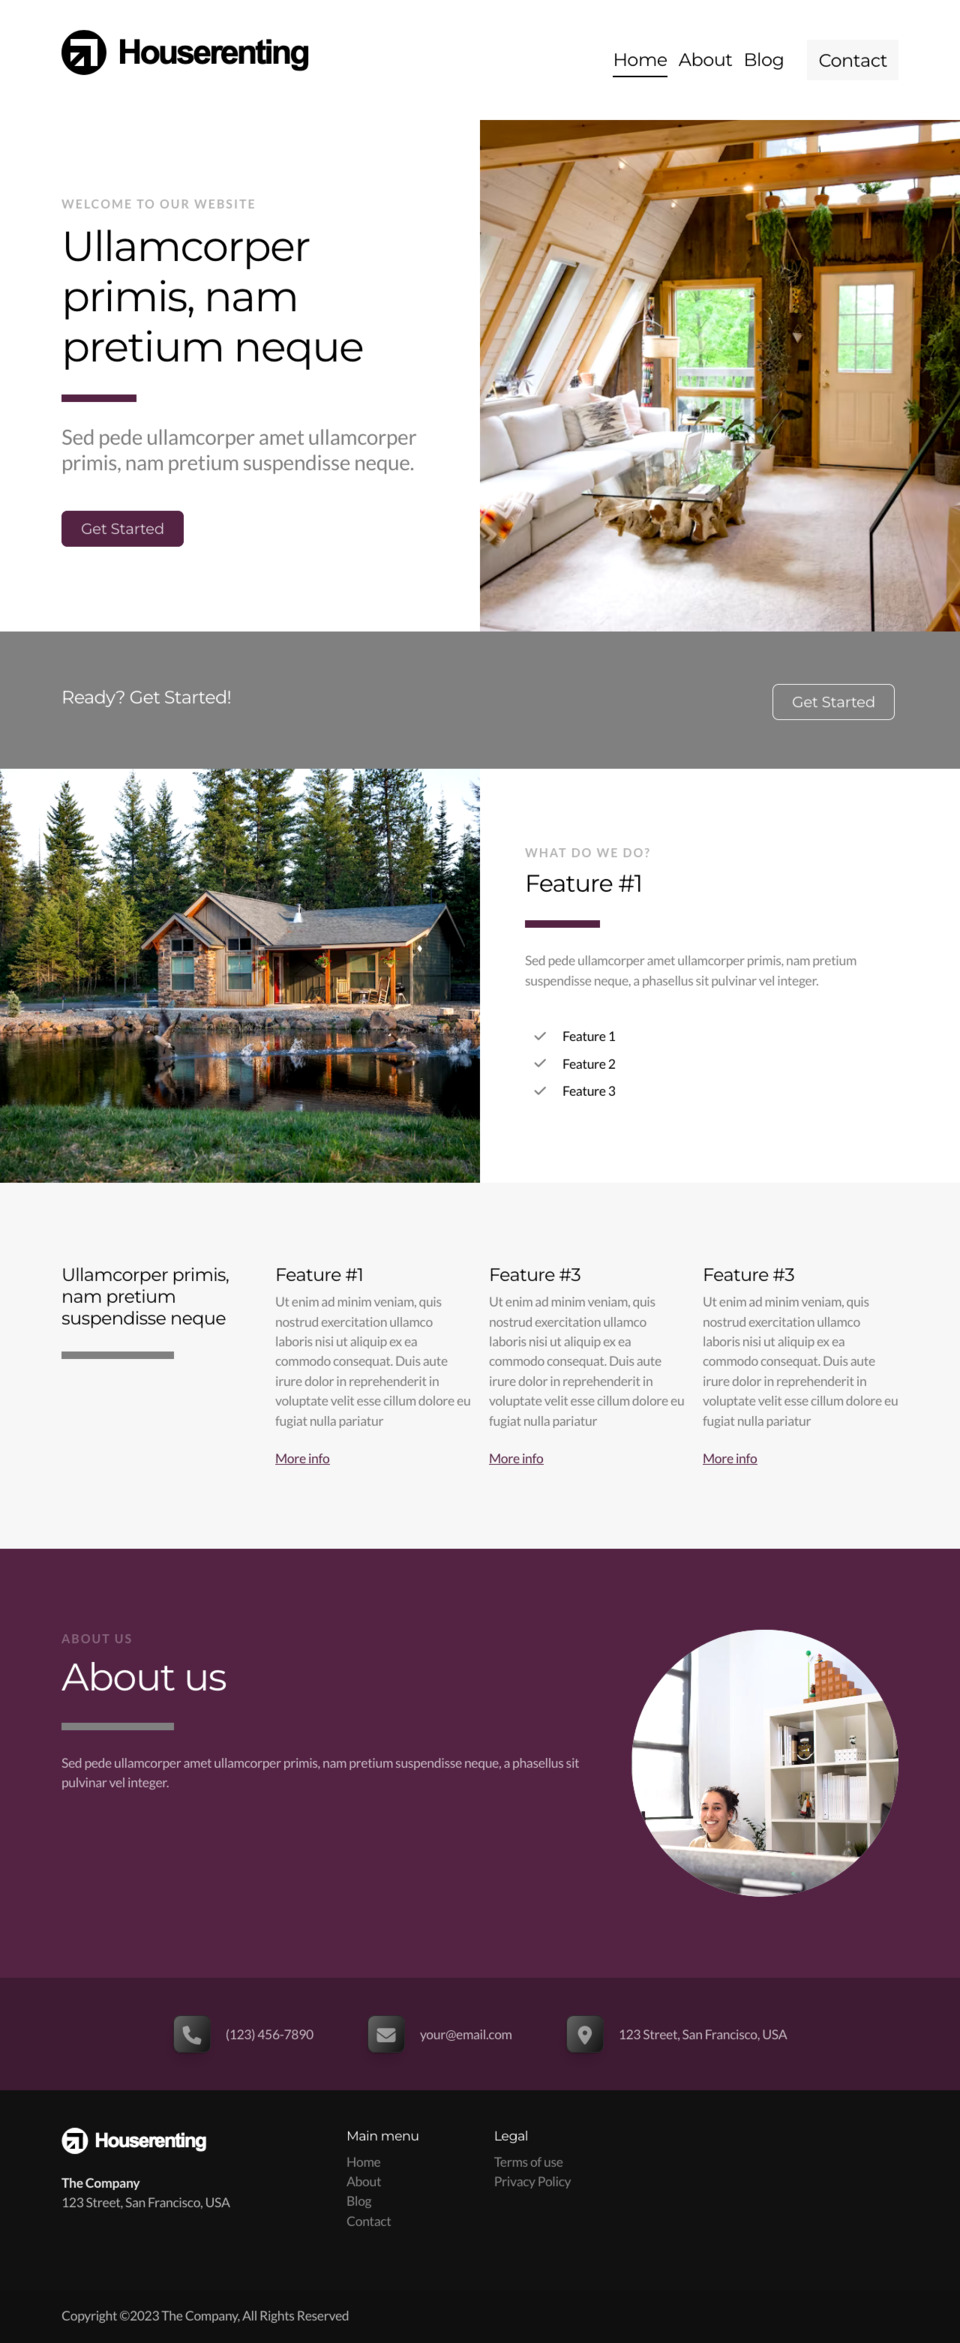 House Renting Website Template - Ideal for property managers, vacation rental owners, rental agencies, property management companies, and anyone in the rental industry.